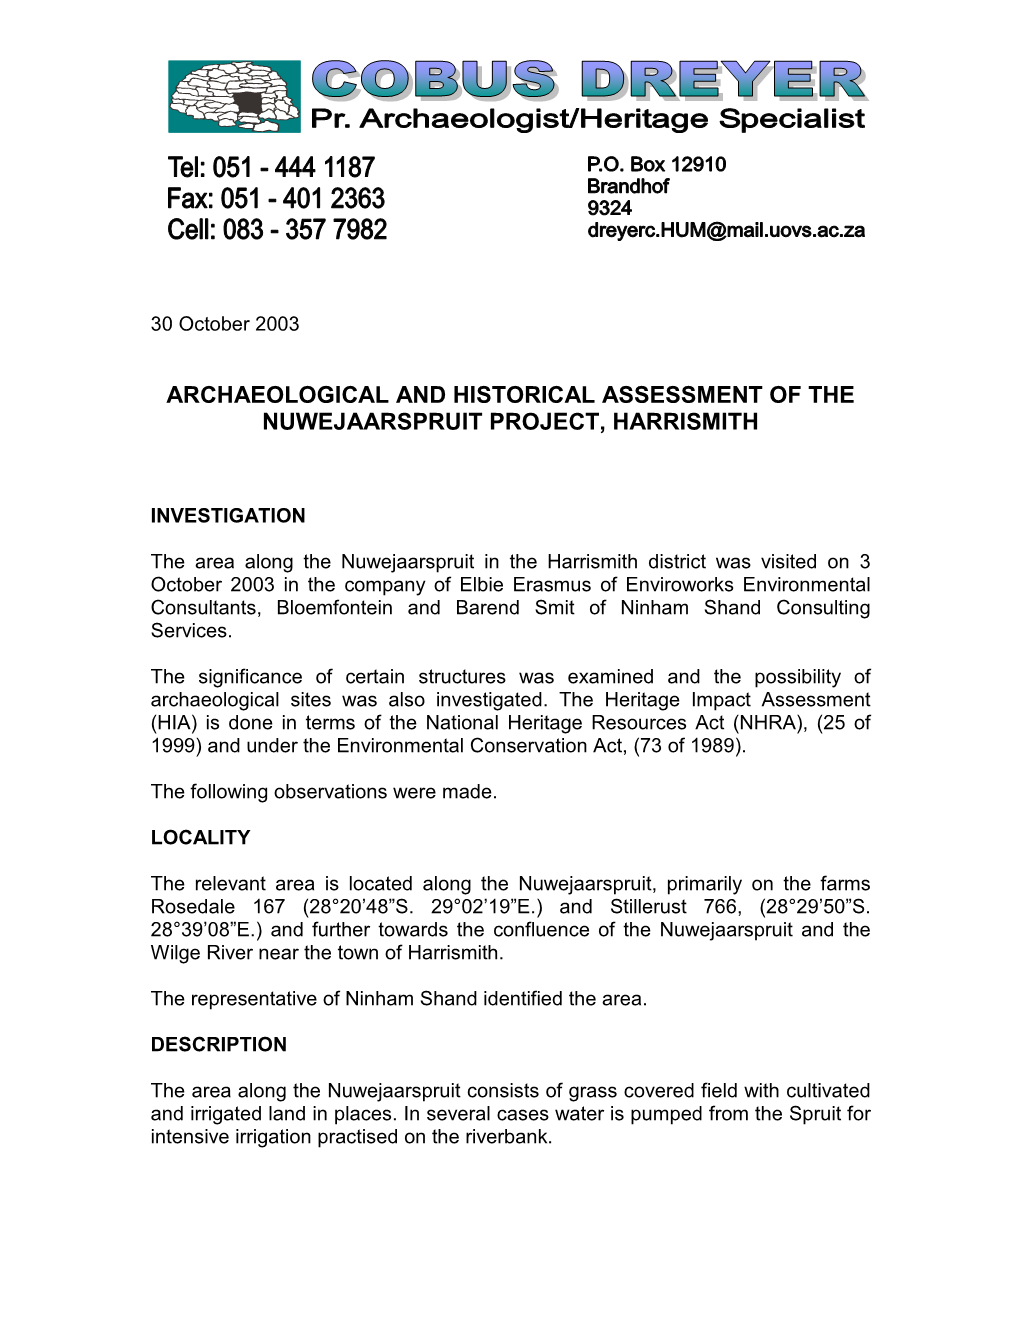 Archaeological and Historical Assessment of the Nuwejaarspruit Project, Harrismith